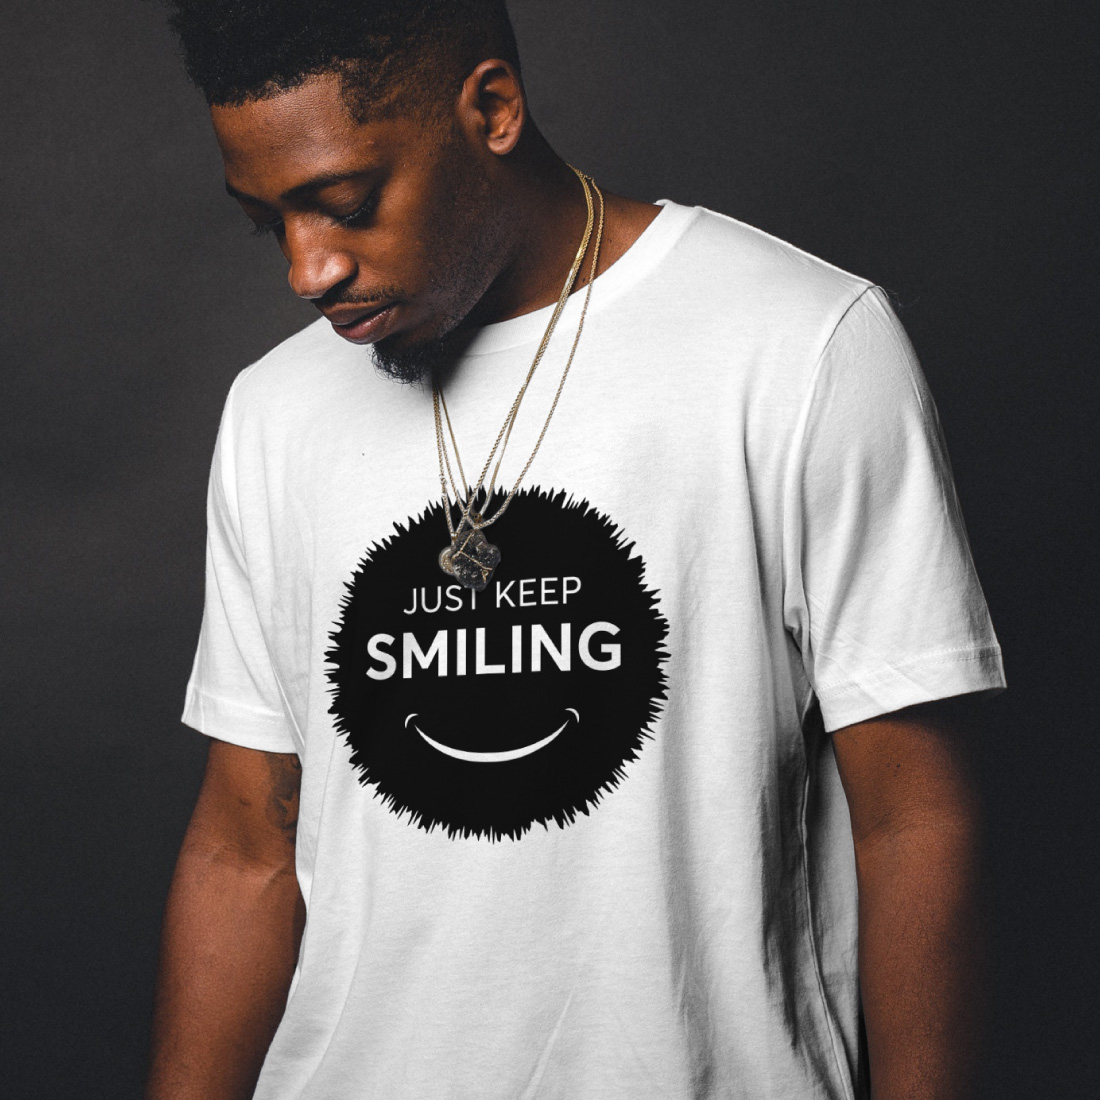 Just keep smiling tshirt design preview image.